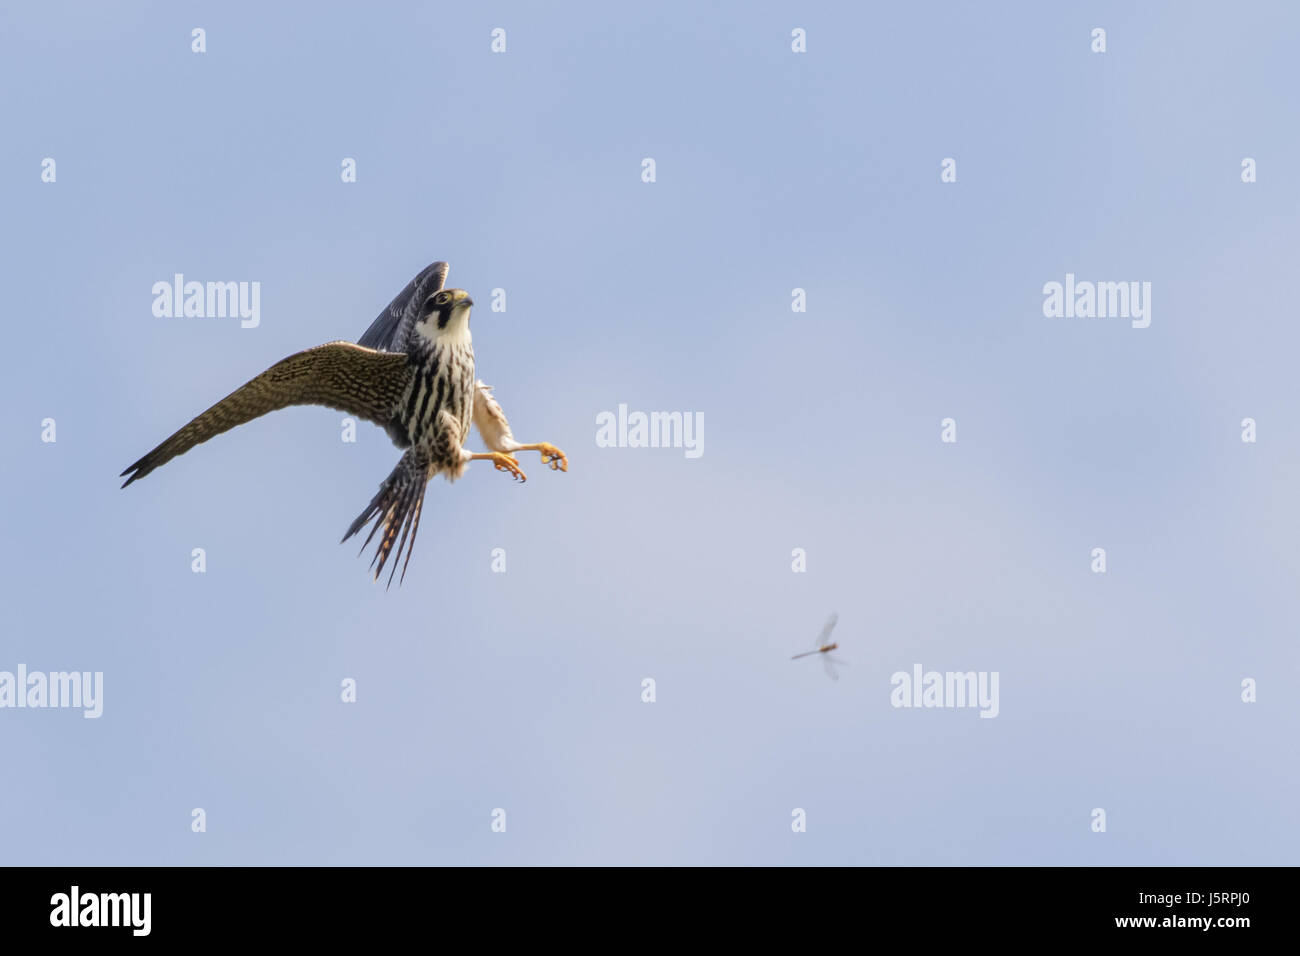 Eurasian Hobby falcon (Falco subbuteo) flying, in flight, hunting catching predating chasing dragonfly dragonflies against blue sky Stock Photo